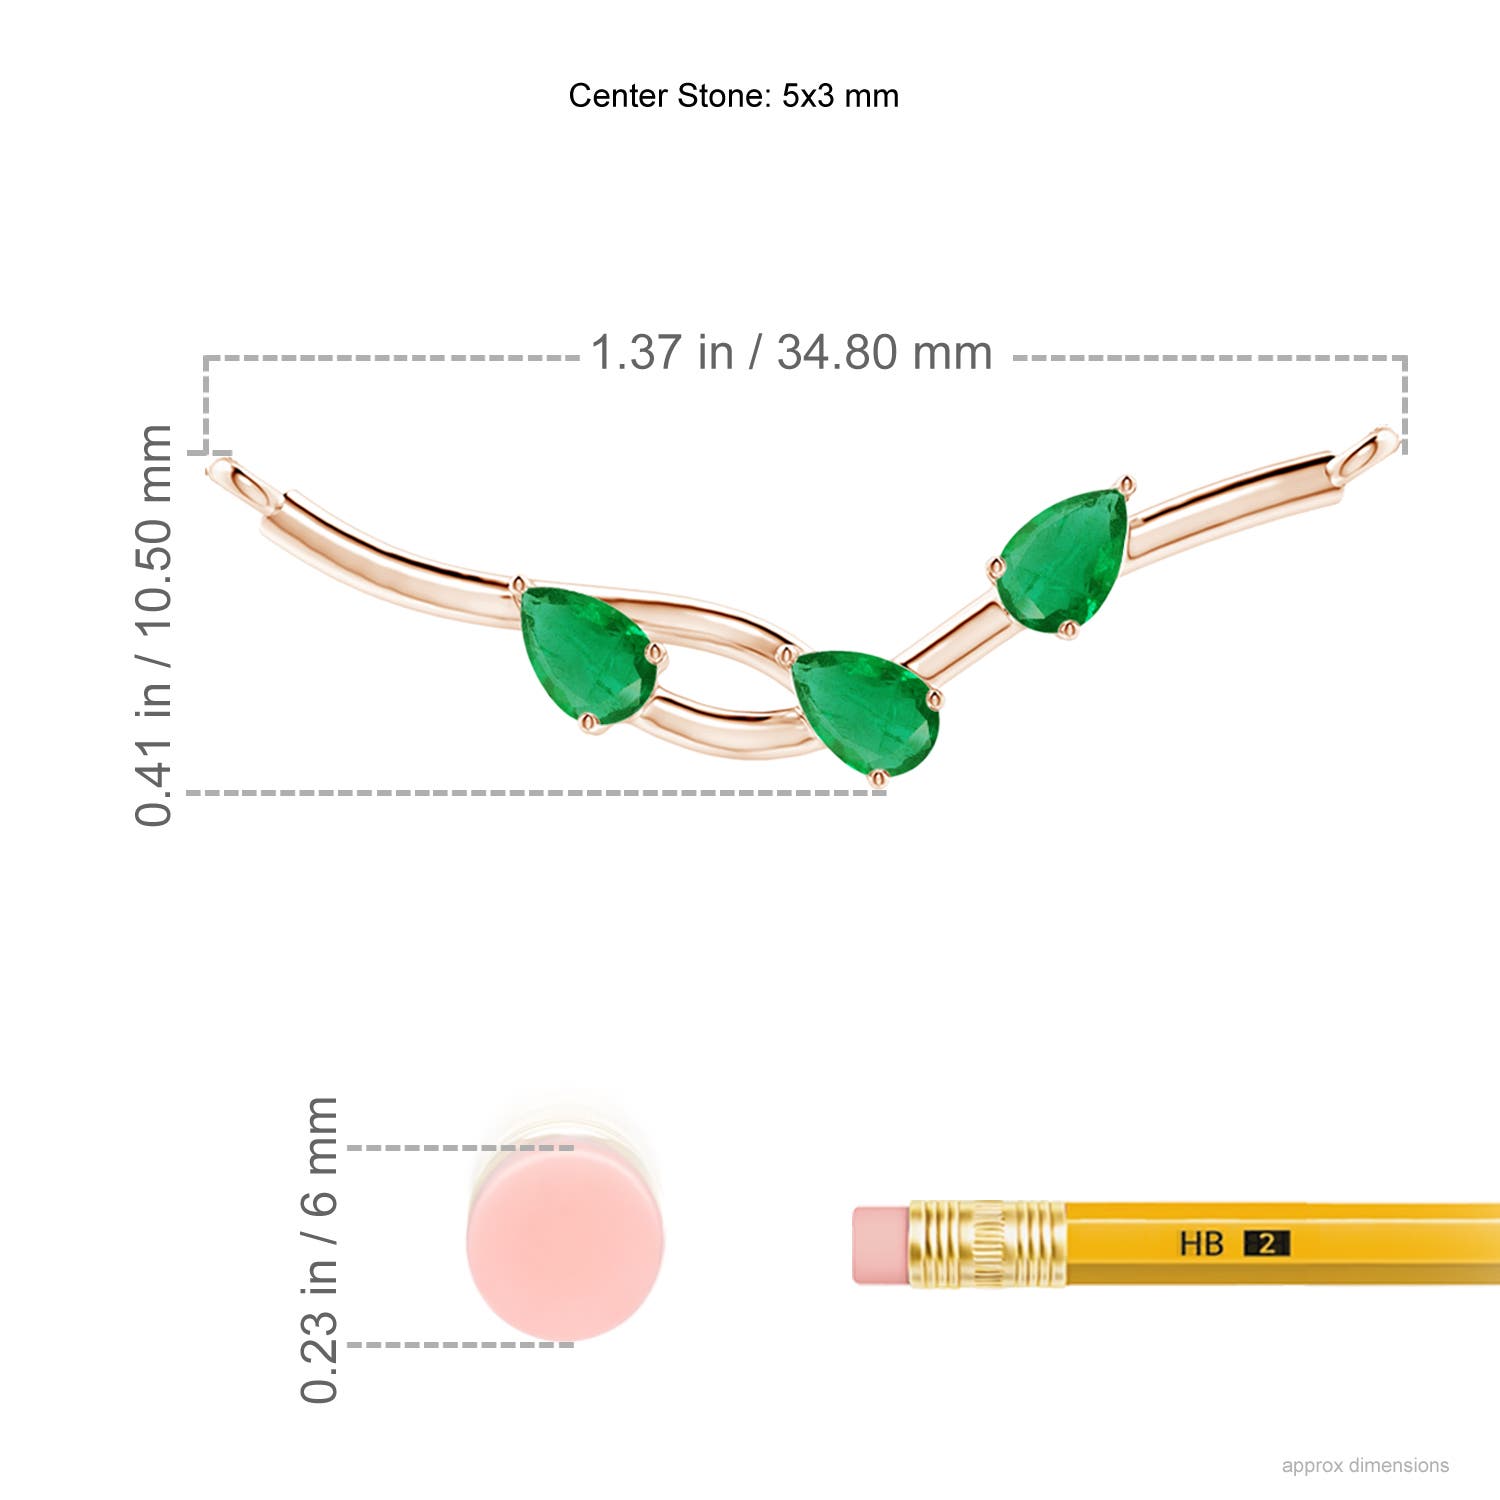 AA - Emerald / 0.6 CT / 14 KT Rose Gold